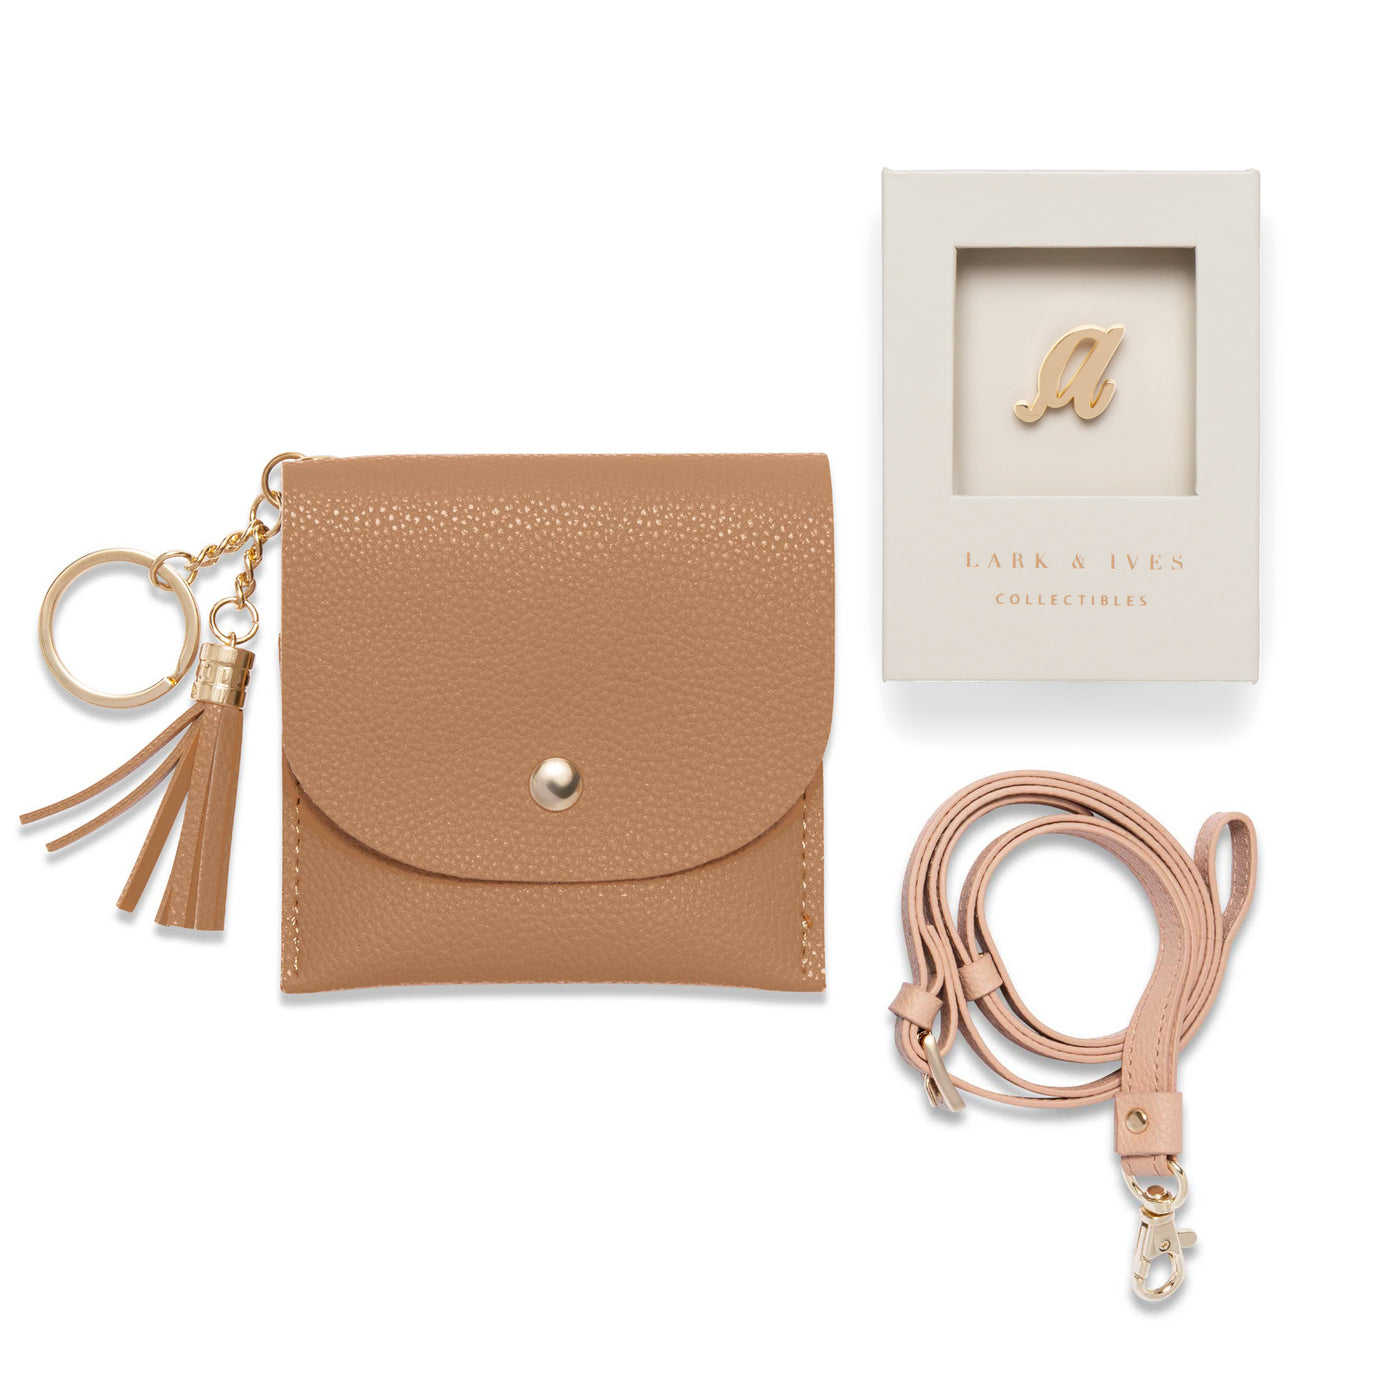 Lark and Ives / Vegan Leather Accessories / Small Accessories / Wallet / Mini Wallet / Card Case / Card Holder / Button snap closure / Flap Wallet / Card Purse with Gold Button and Keyring / Lanyard / Card Purse with Lanyard  and Monogram Pin  / Brown